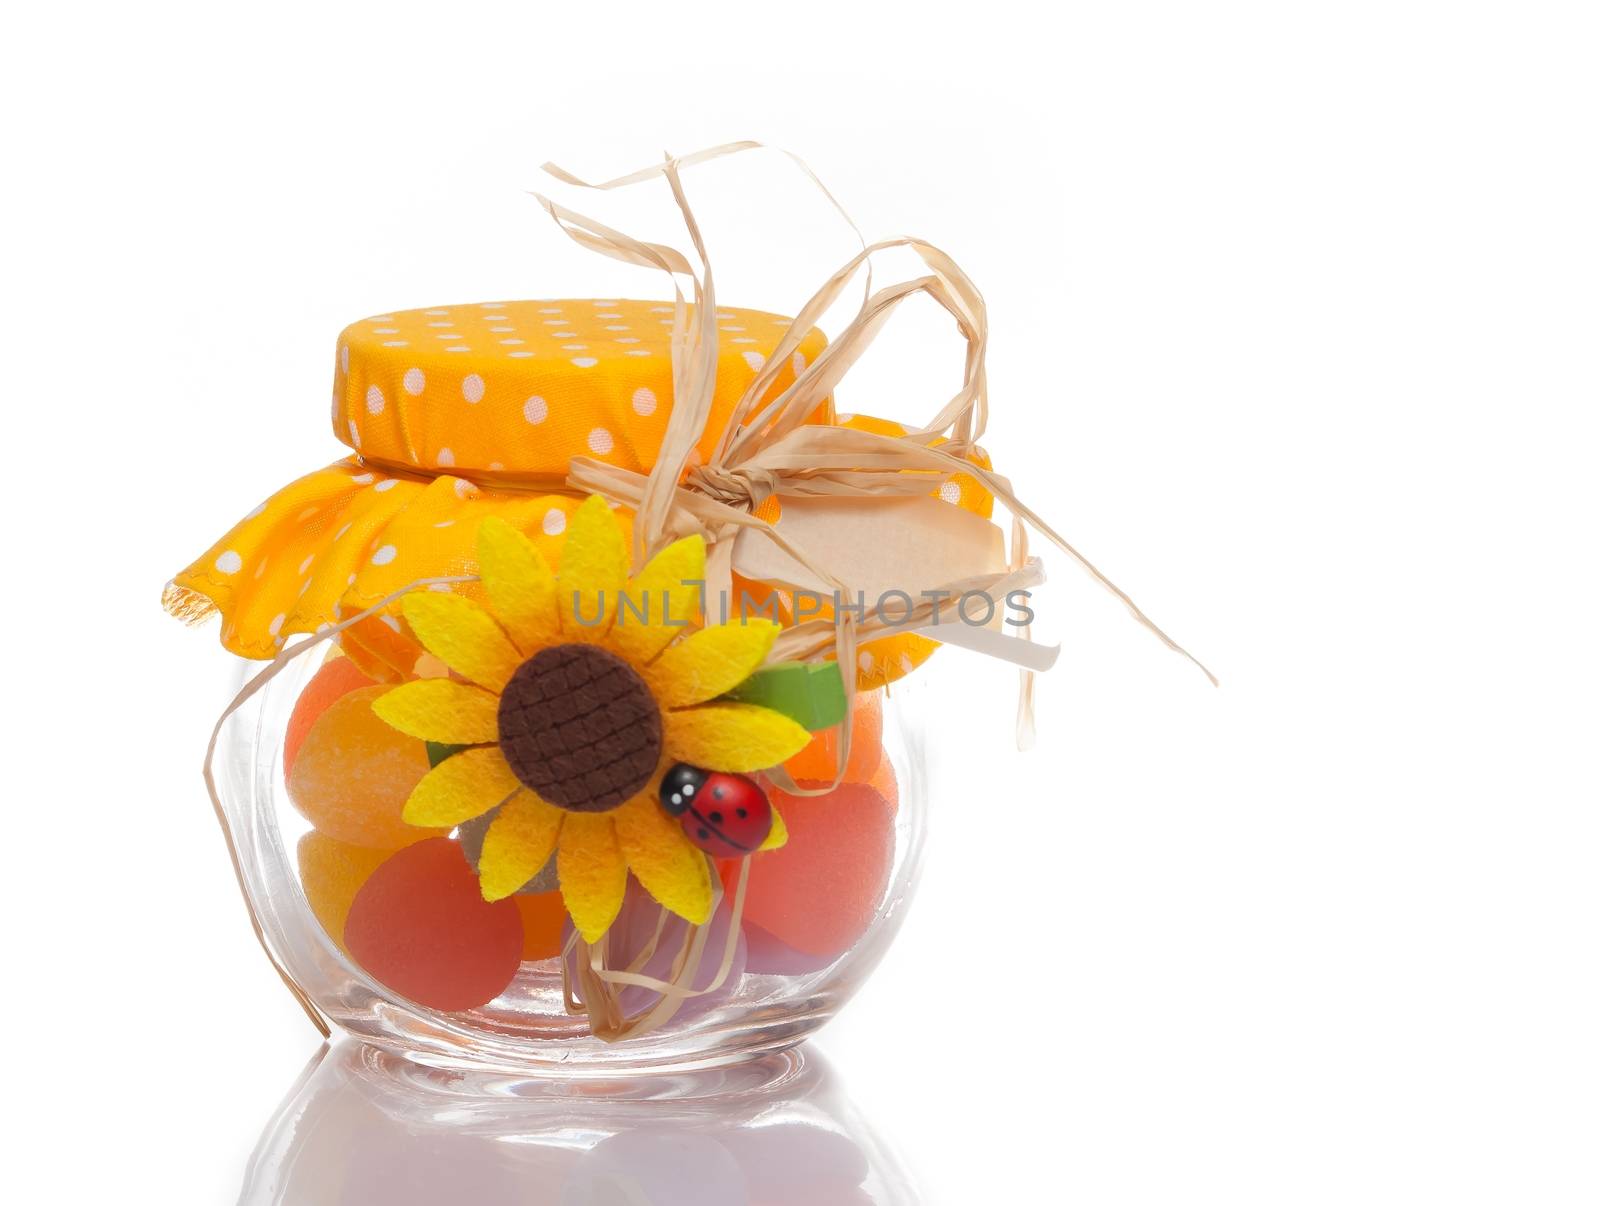 colourful multi coloured candy in a decorative glass jar for a festive gift on white background